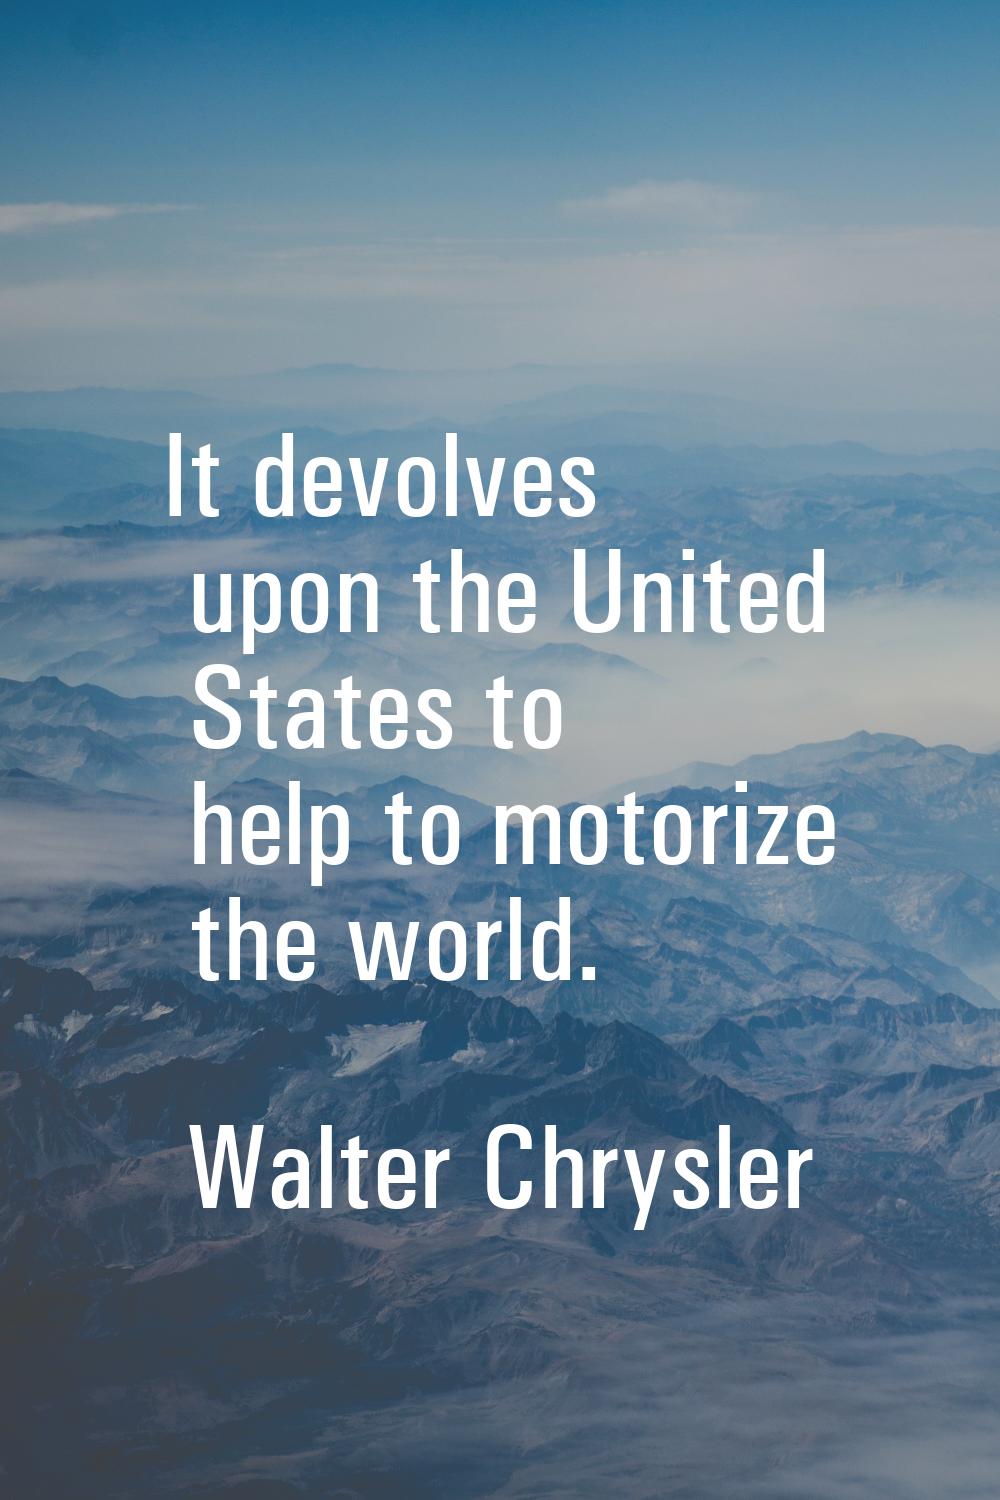 It devolves upon the United States to help to motorize the world.